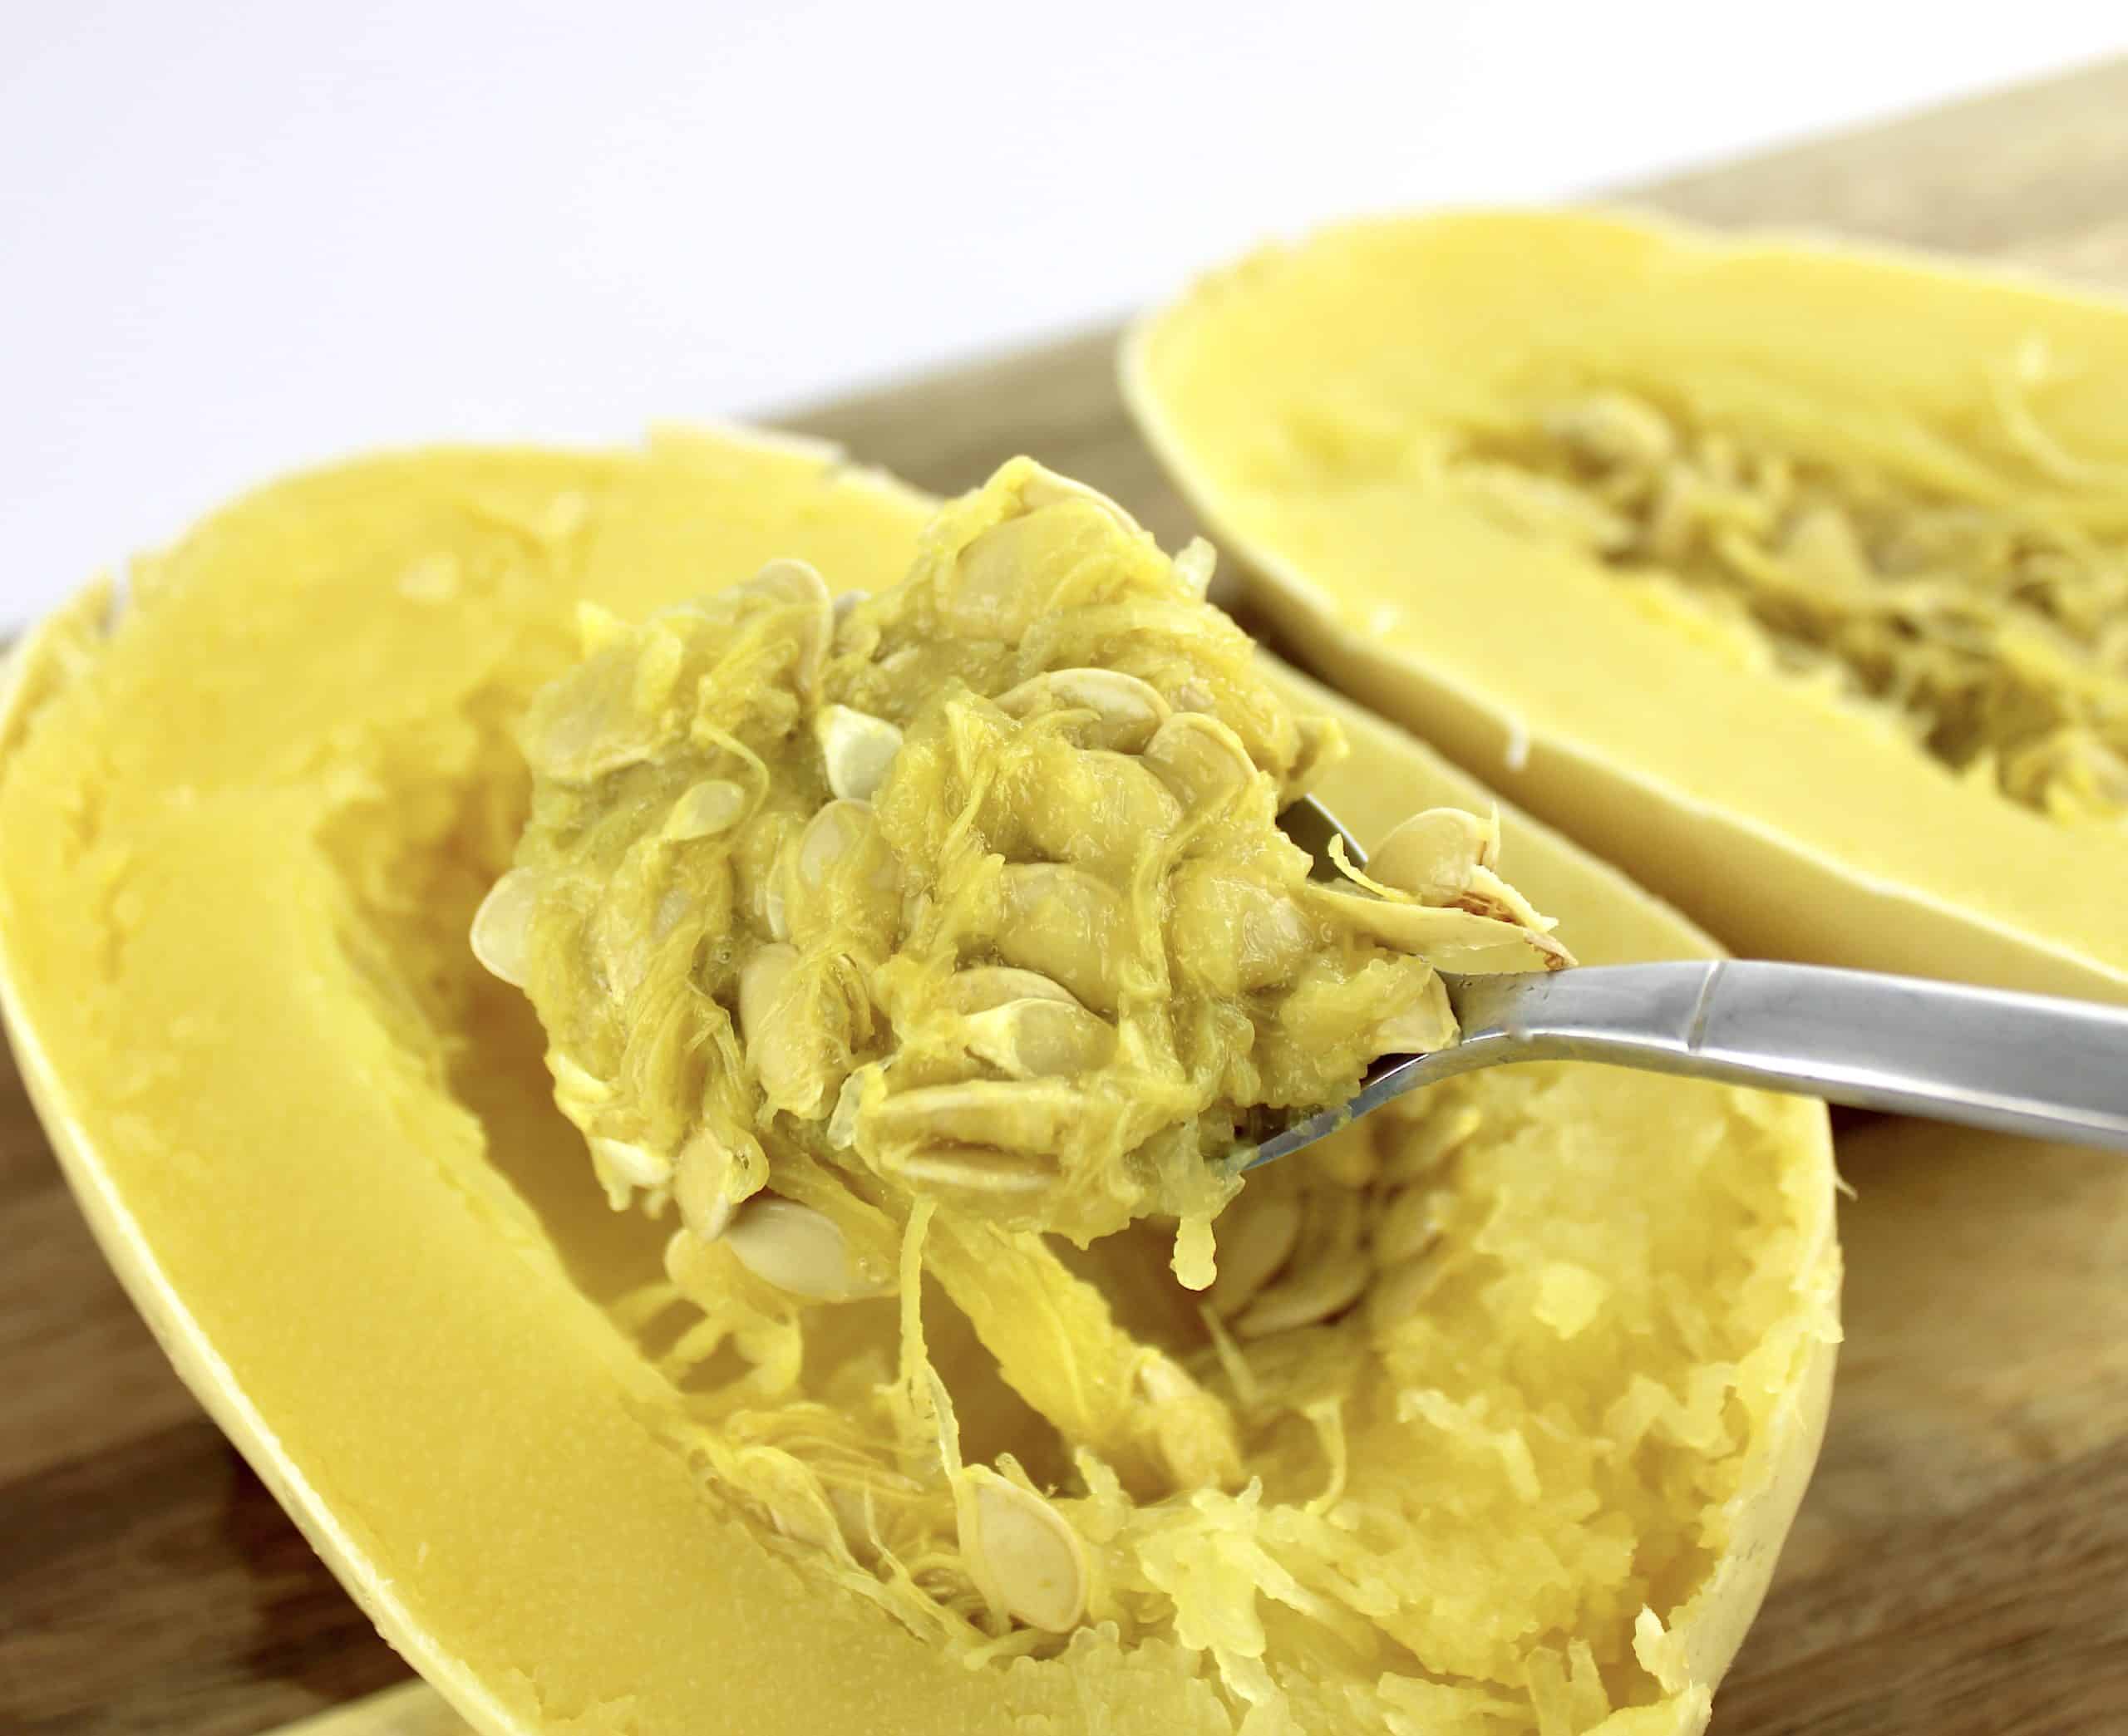 seeds and pulp being scooped out of spaghetti squash cut in half